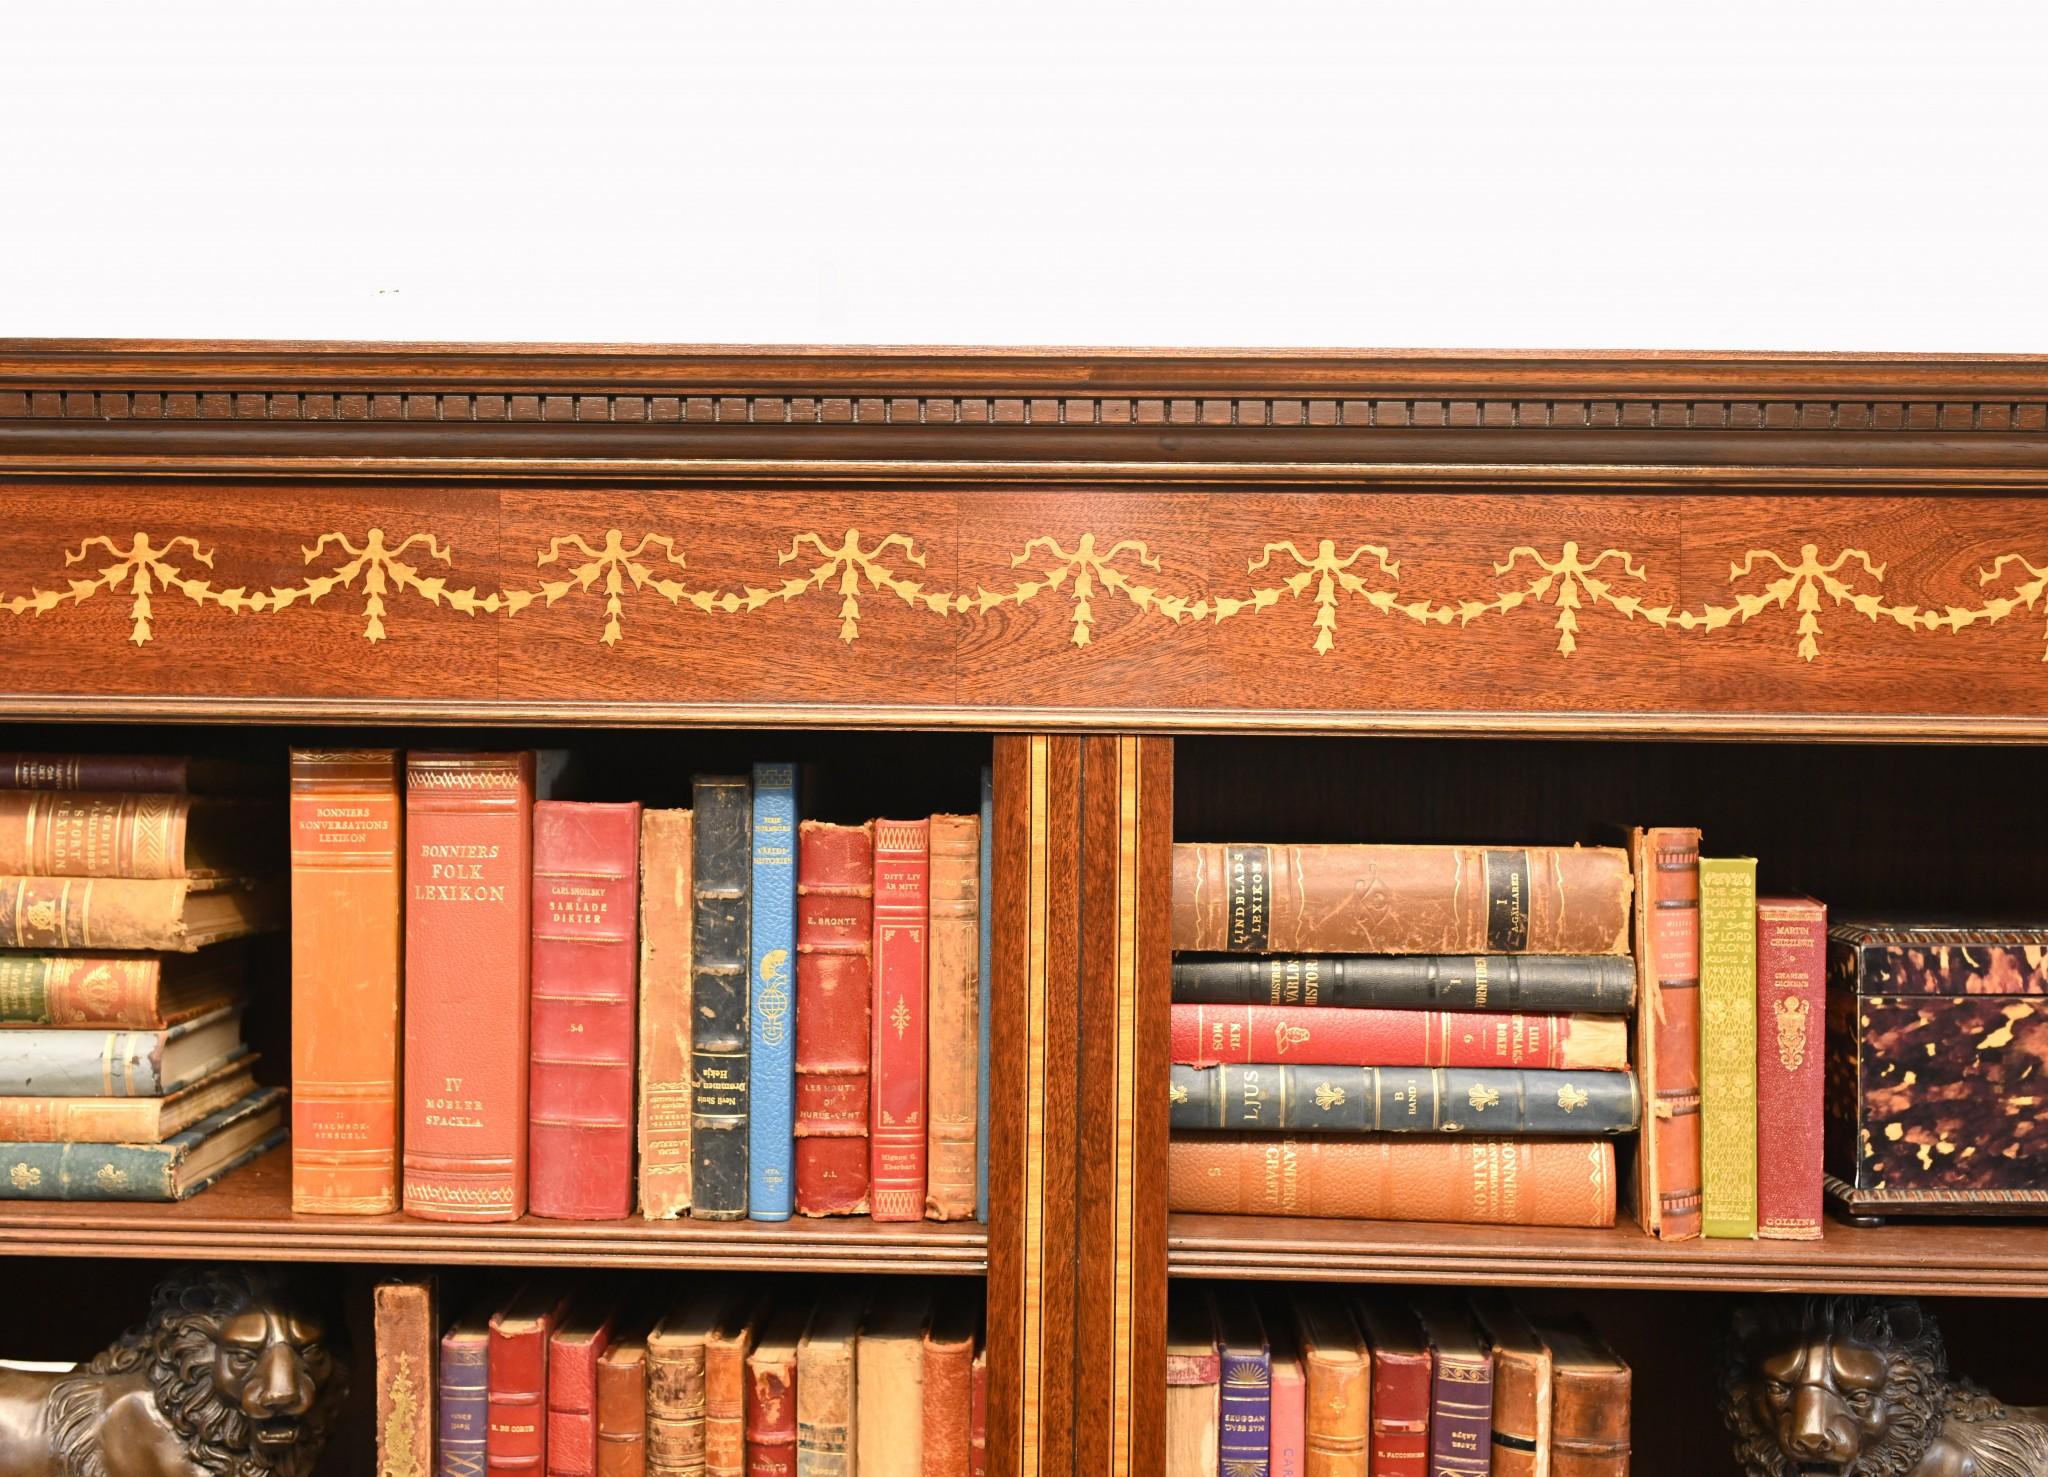 You are viewing a gorgeous double fronted English mahogany openfront bookcase with Sheraton inlay. I hope the photos do this stunning piece some justice, it is certainly more impressive in the flesh.

The piece has an air of classical refinement